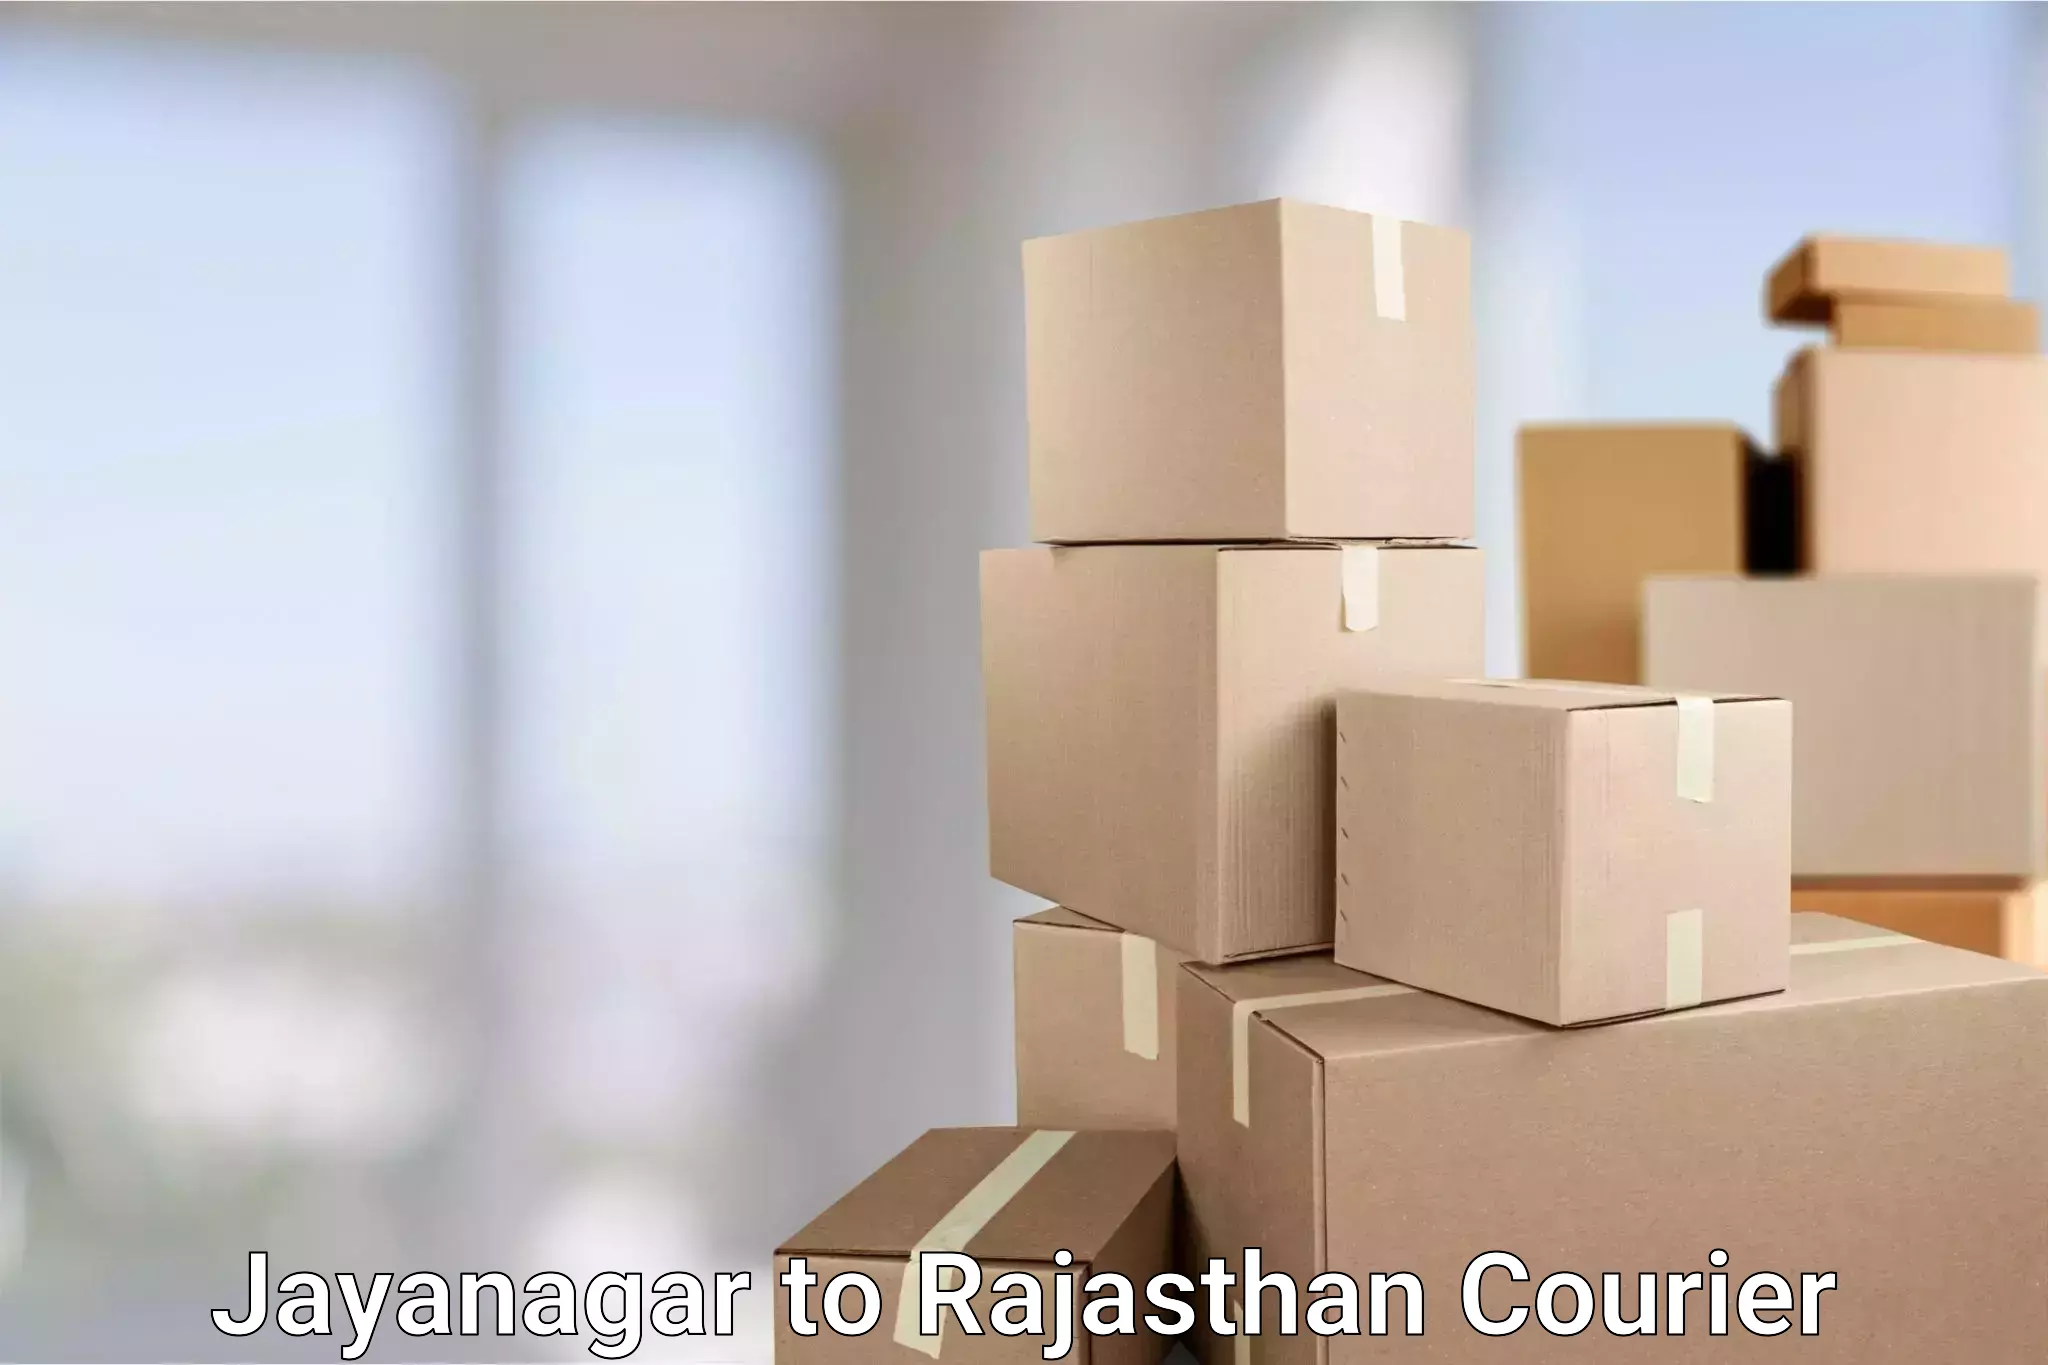 Parcel service for businesses Jayanagar to Yeswanthapur